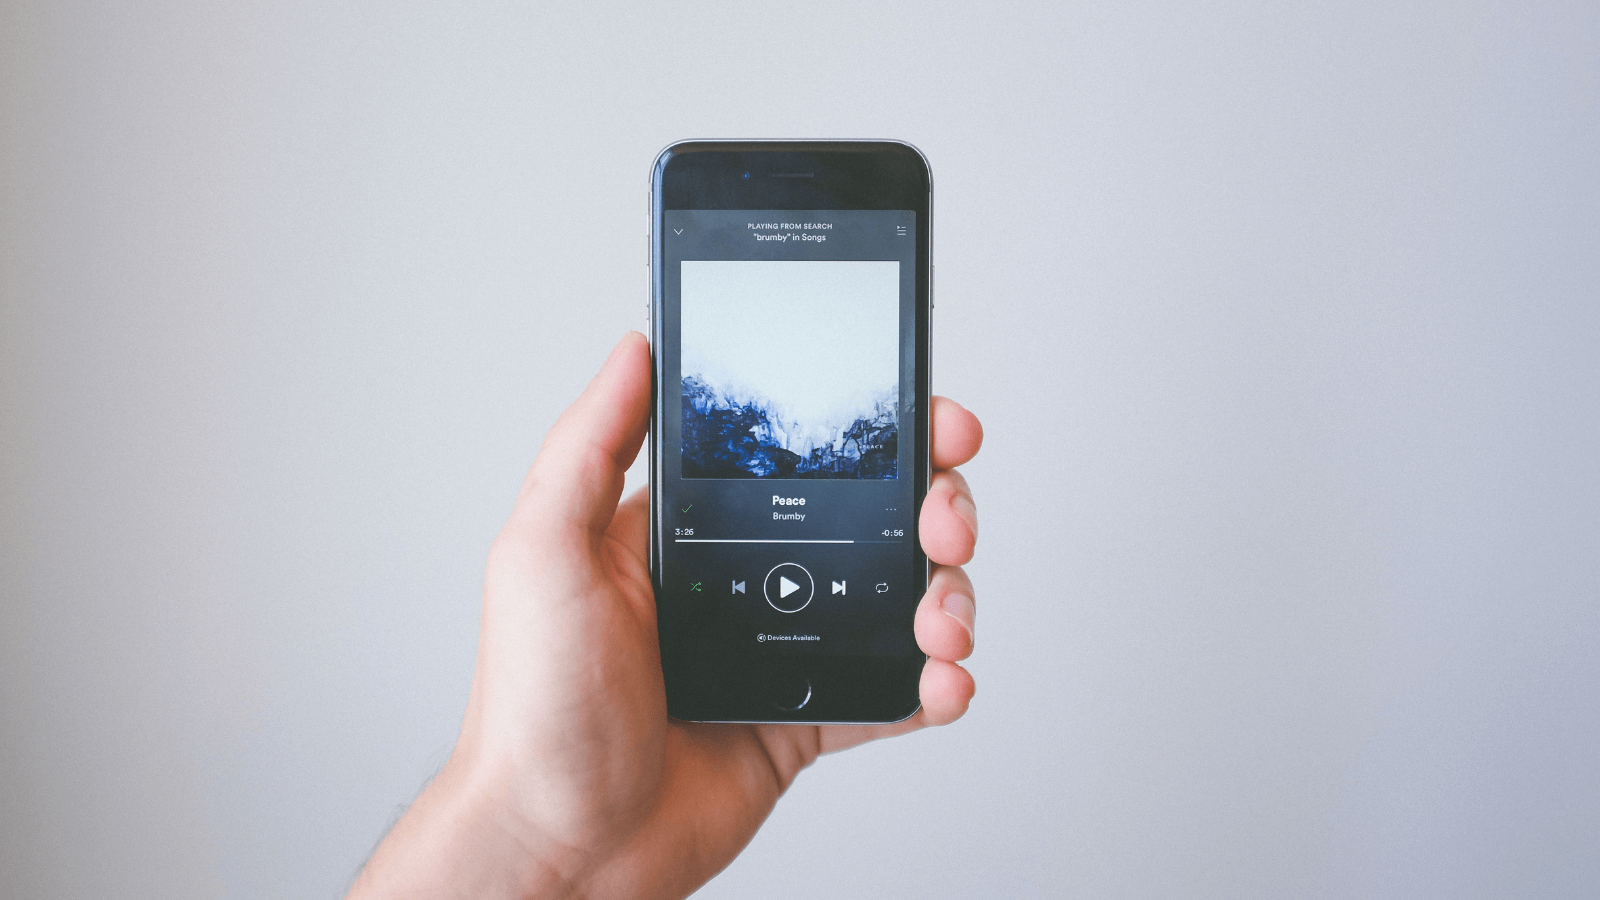 man holding iphone with spotify displayed on screen